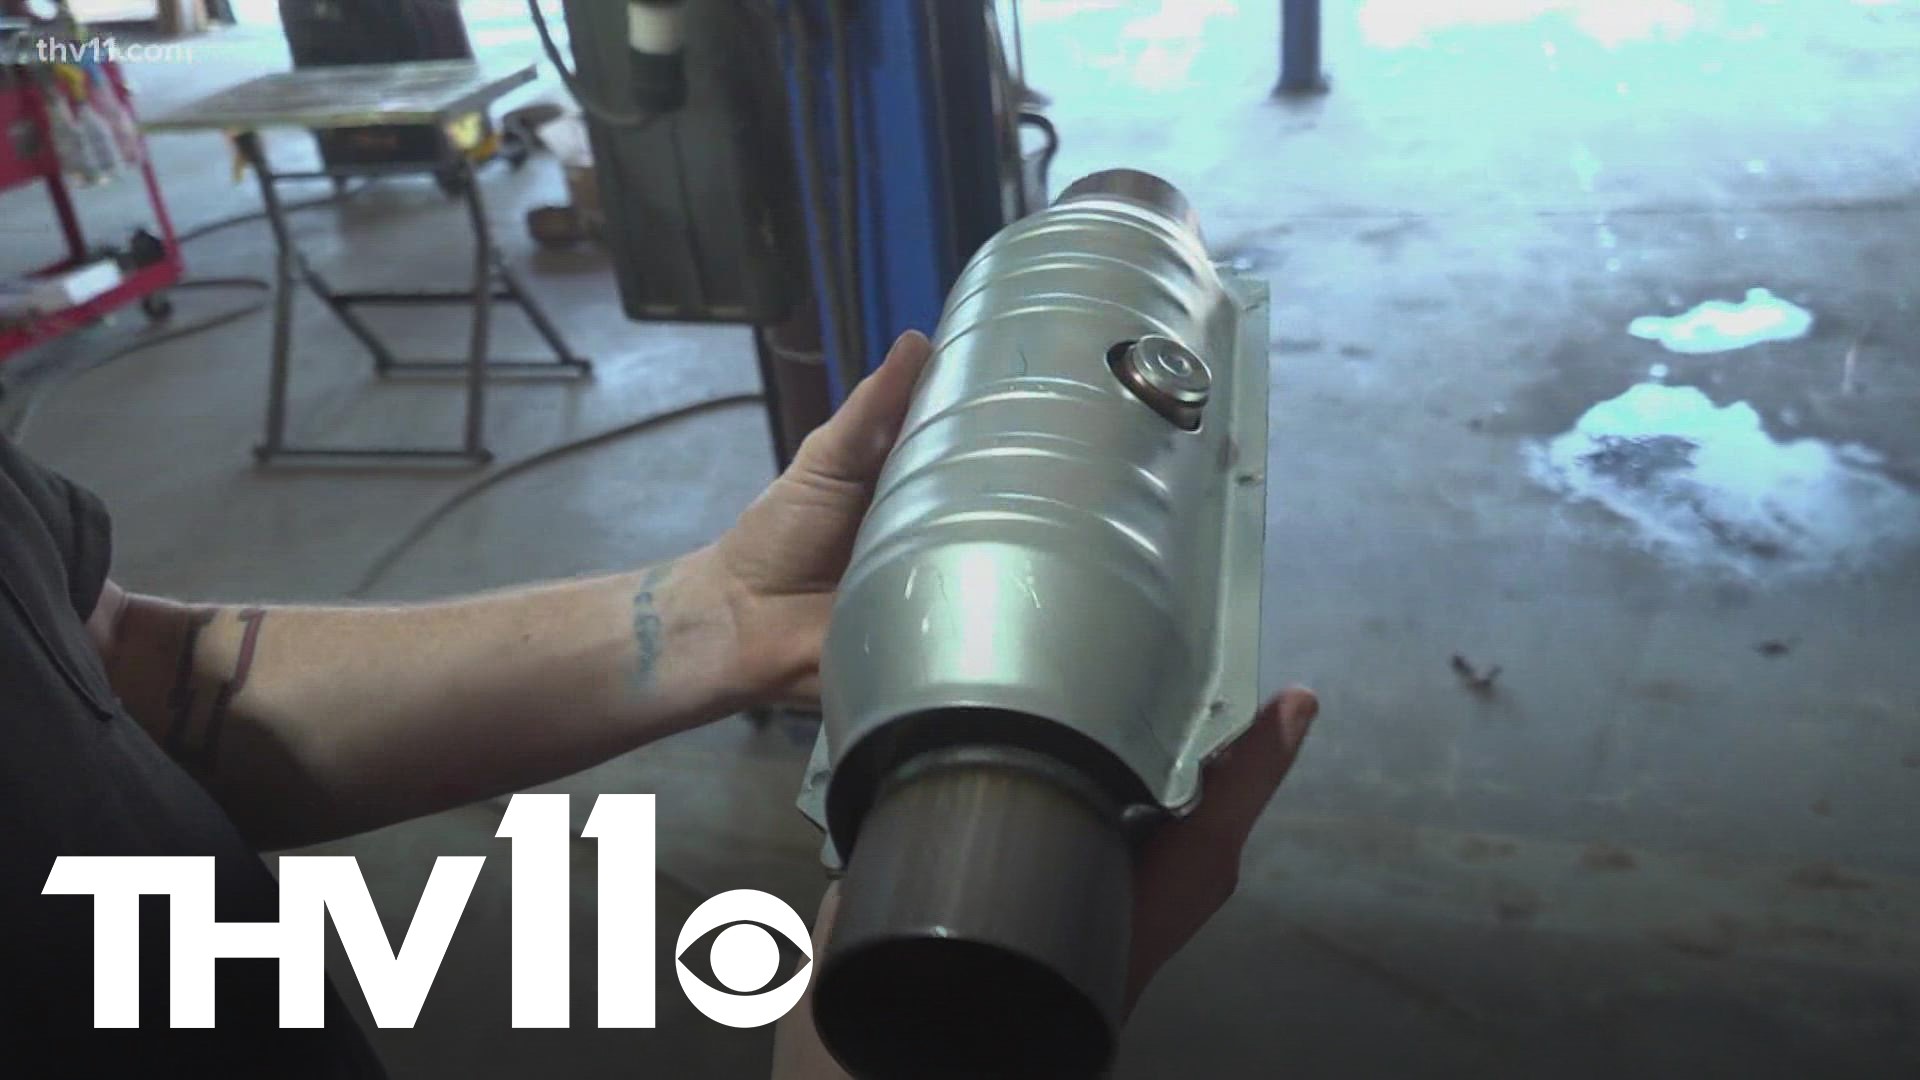 A catalytic converter only takes a few seconds to steal but can cost up to thousands in repairs— now mechanic shops are sharing some preventative steps.